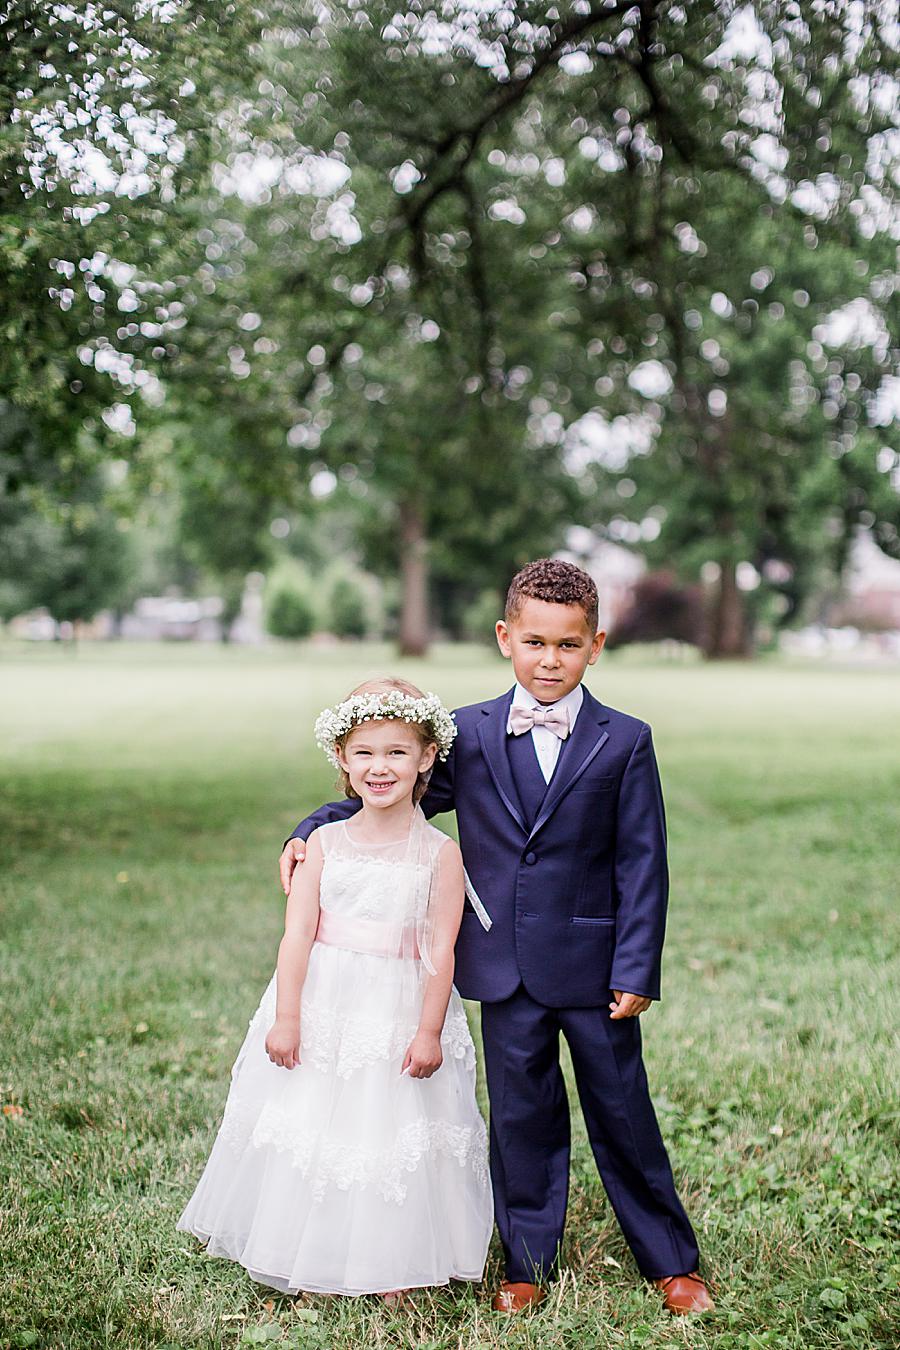 Flower girl and ring bearer at this The Olmsted Wedding by Knoxville Wedding Photographer, Amanda May Photos.